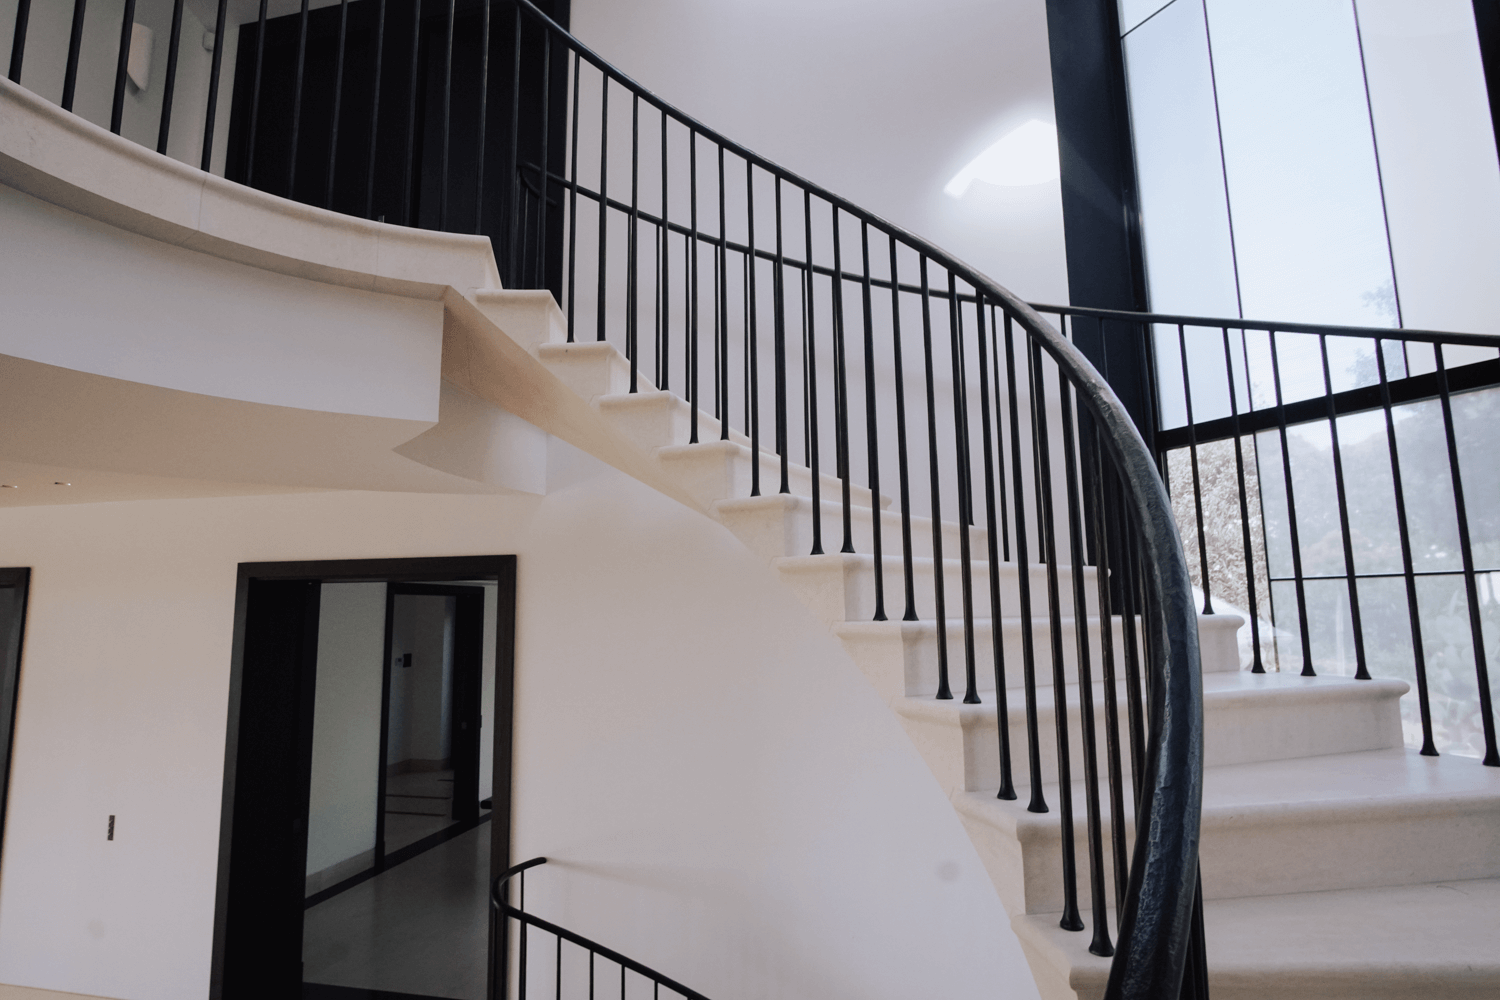 St-Tropez-The-Stonemasonry-Company-Post-Tension-Reinforced-Staircase-6.png